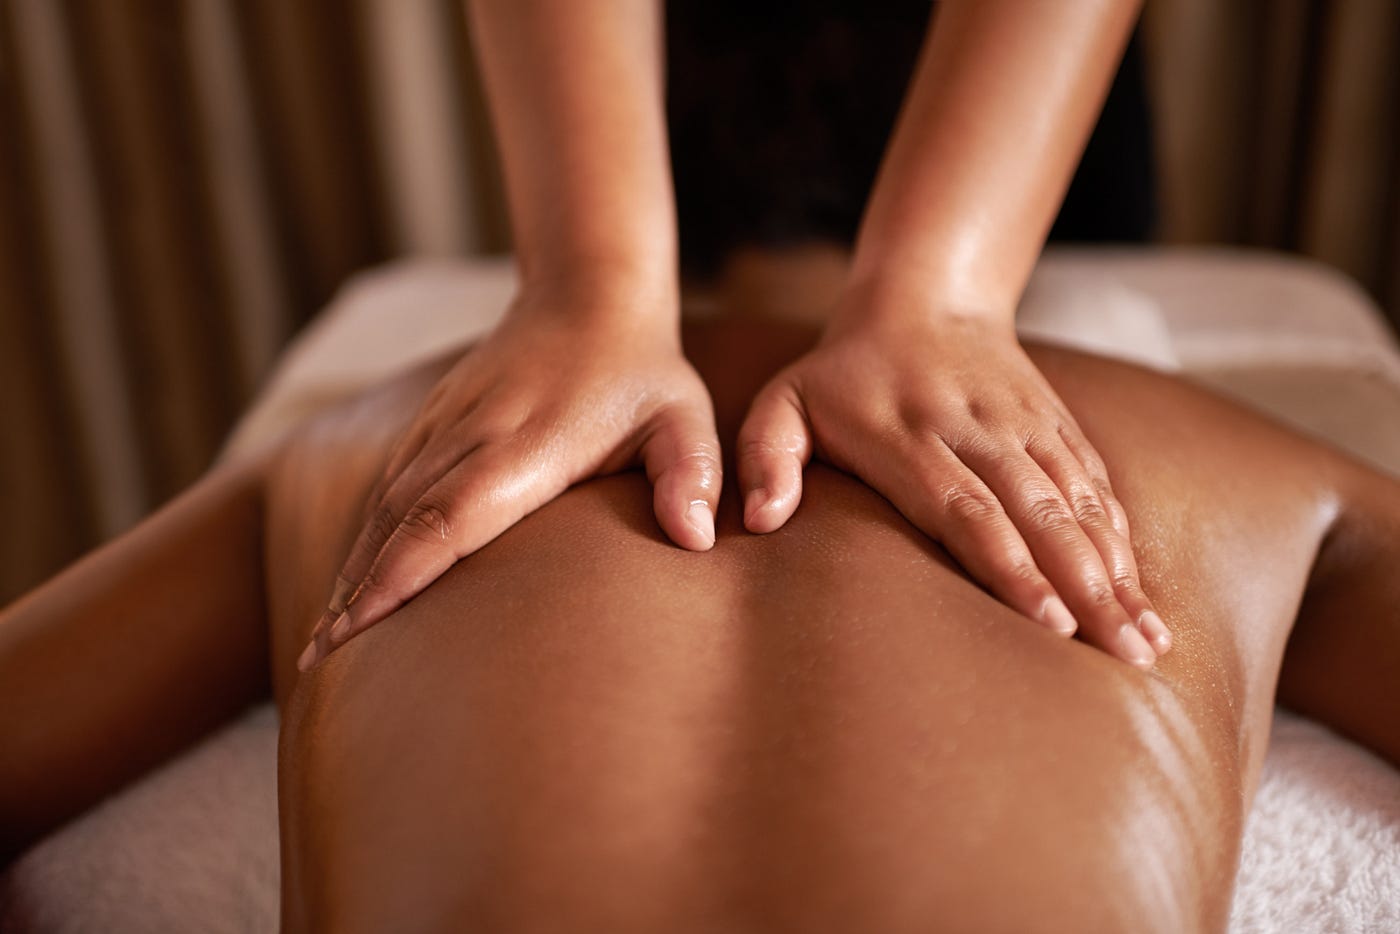 The Science-Backed Benefits of Massage | by Markham Heid | Elemental